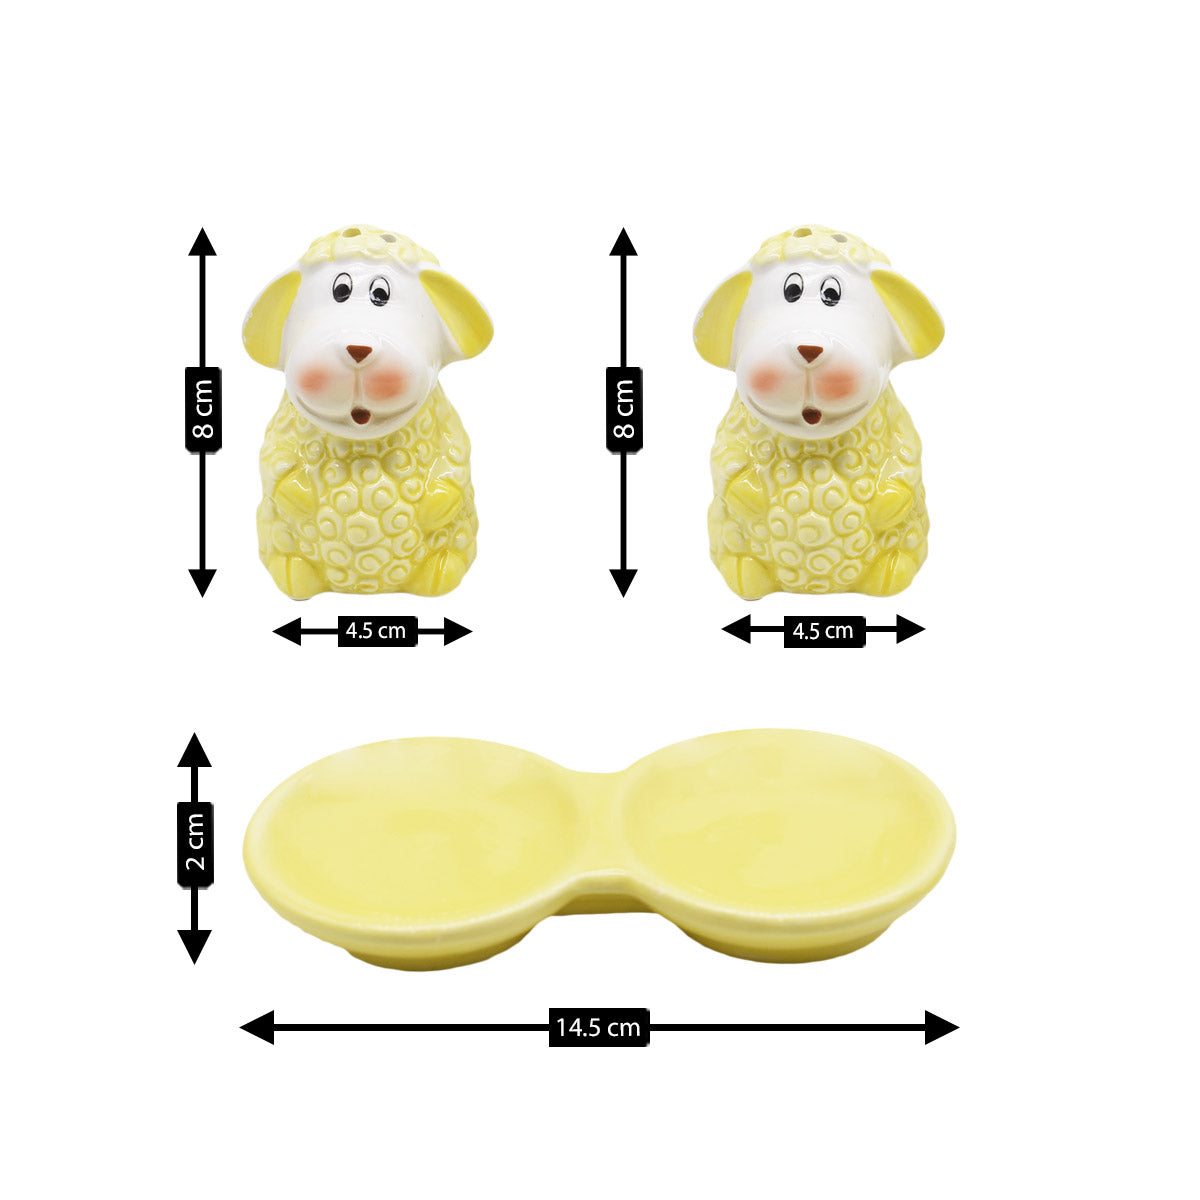 Ceramic Salt and Pepper Set with tray, Sheep Design, Yellow (8562)